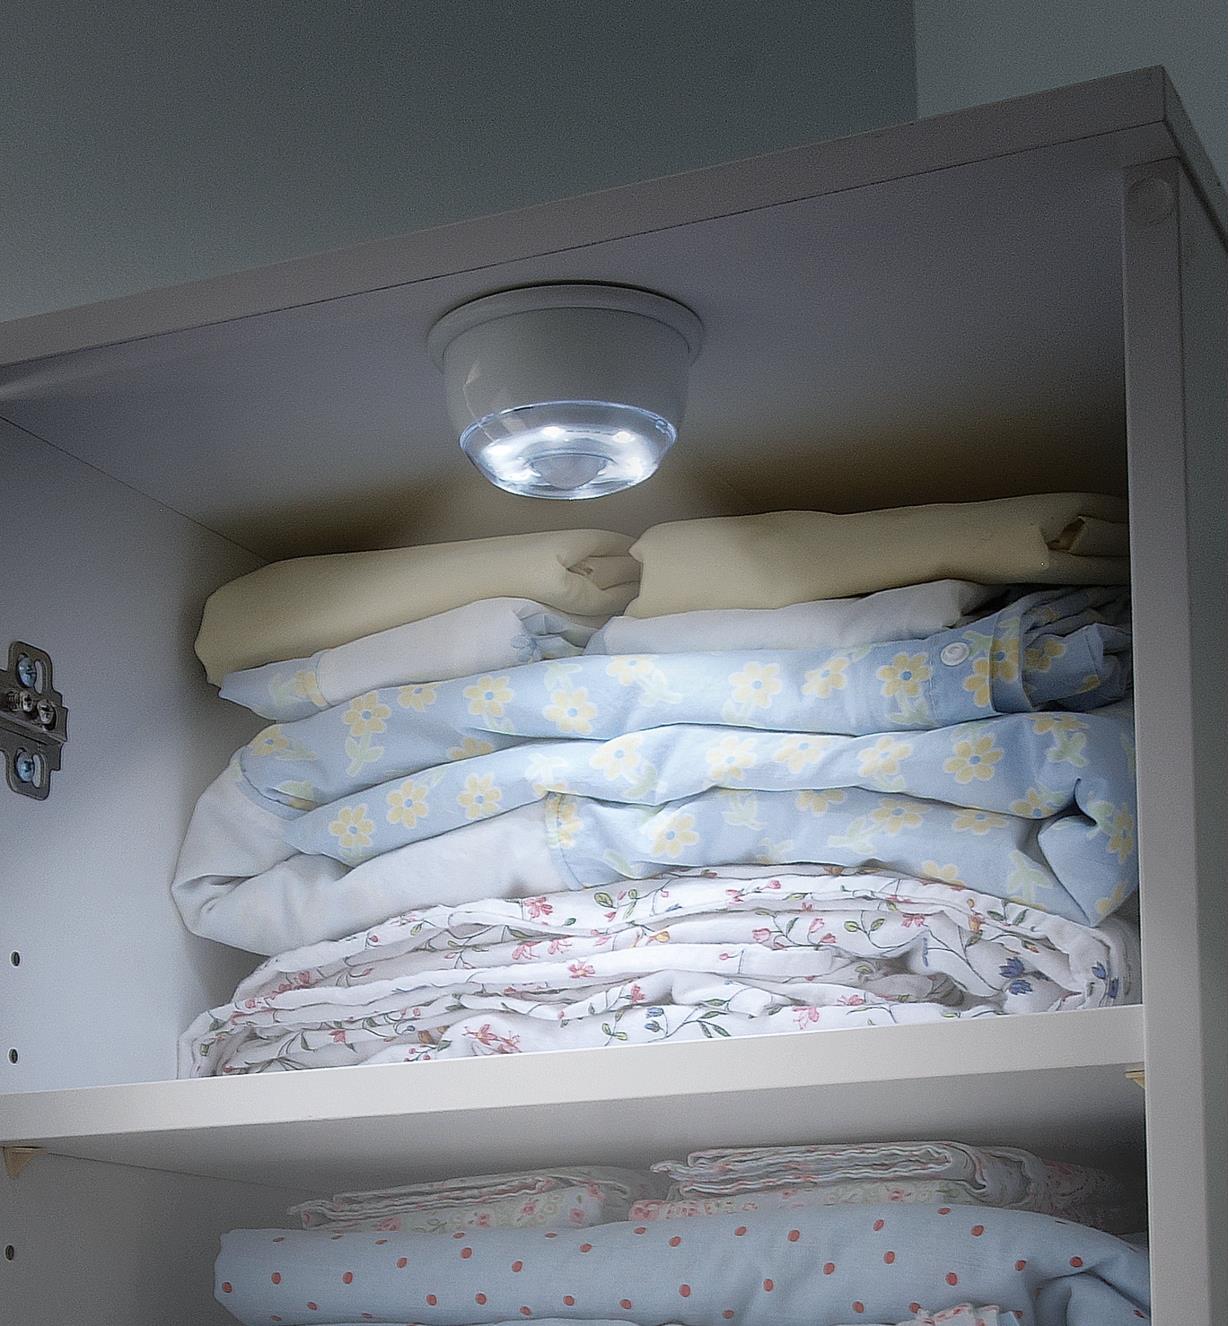 LED Infrared Detection Light mounted in a linen closet